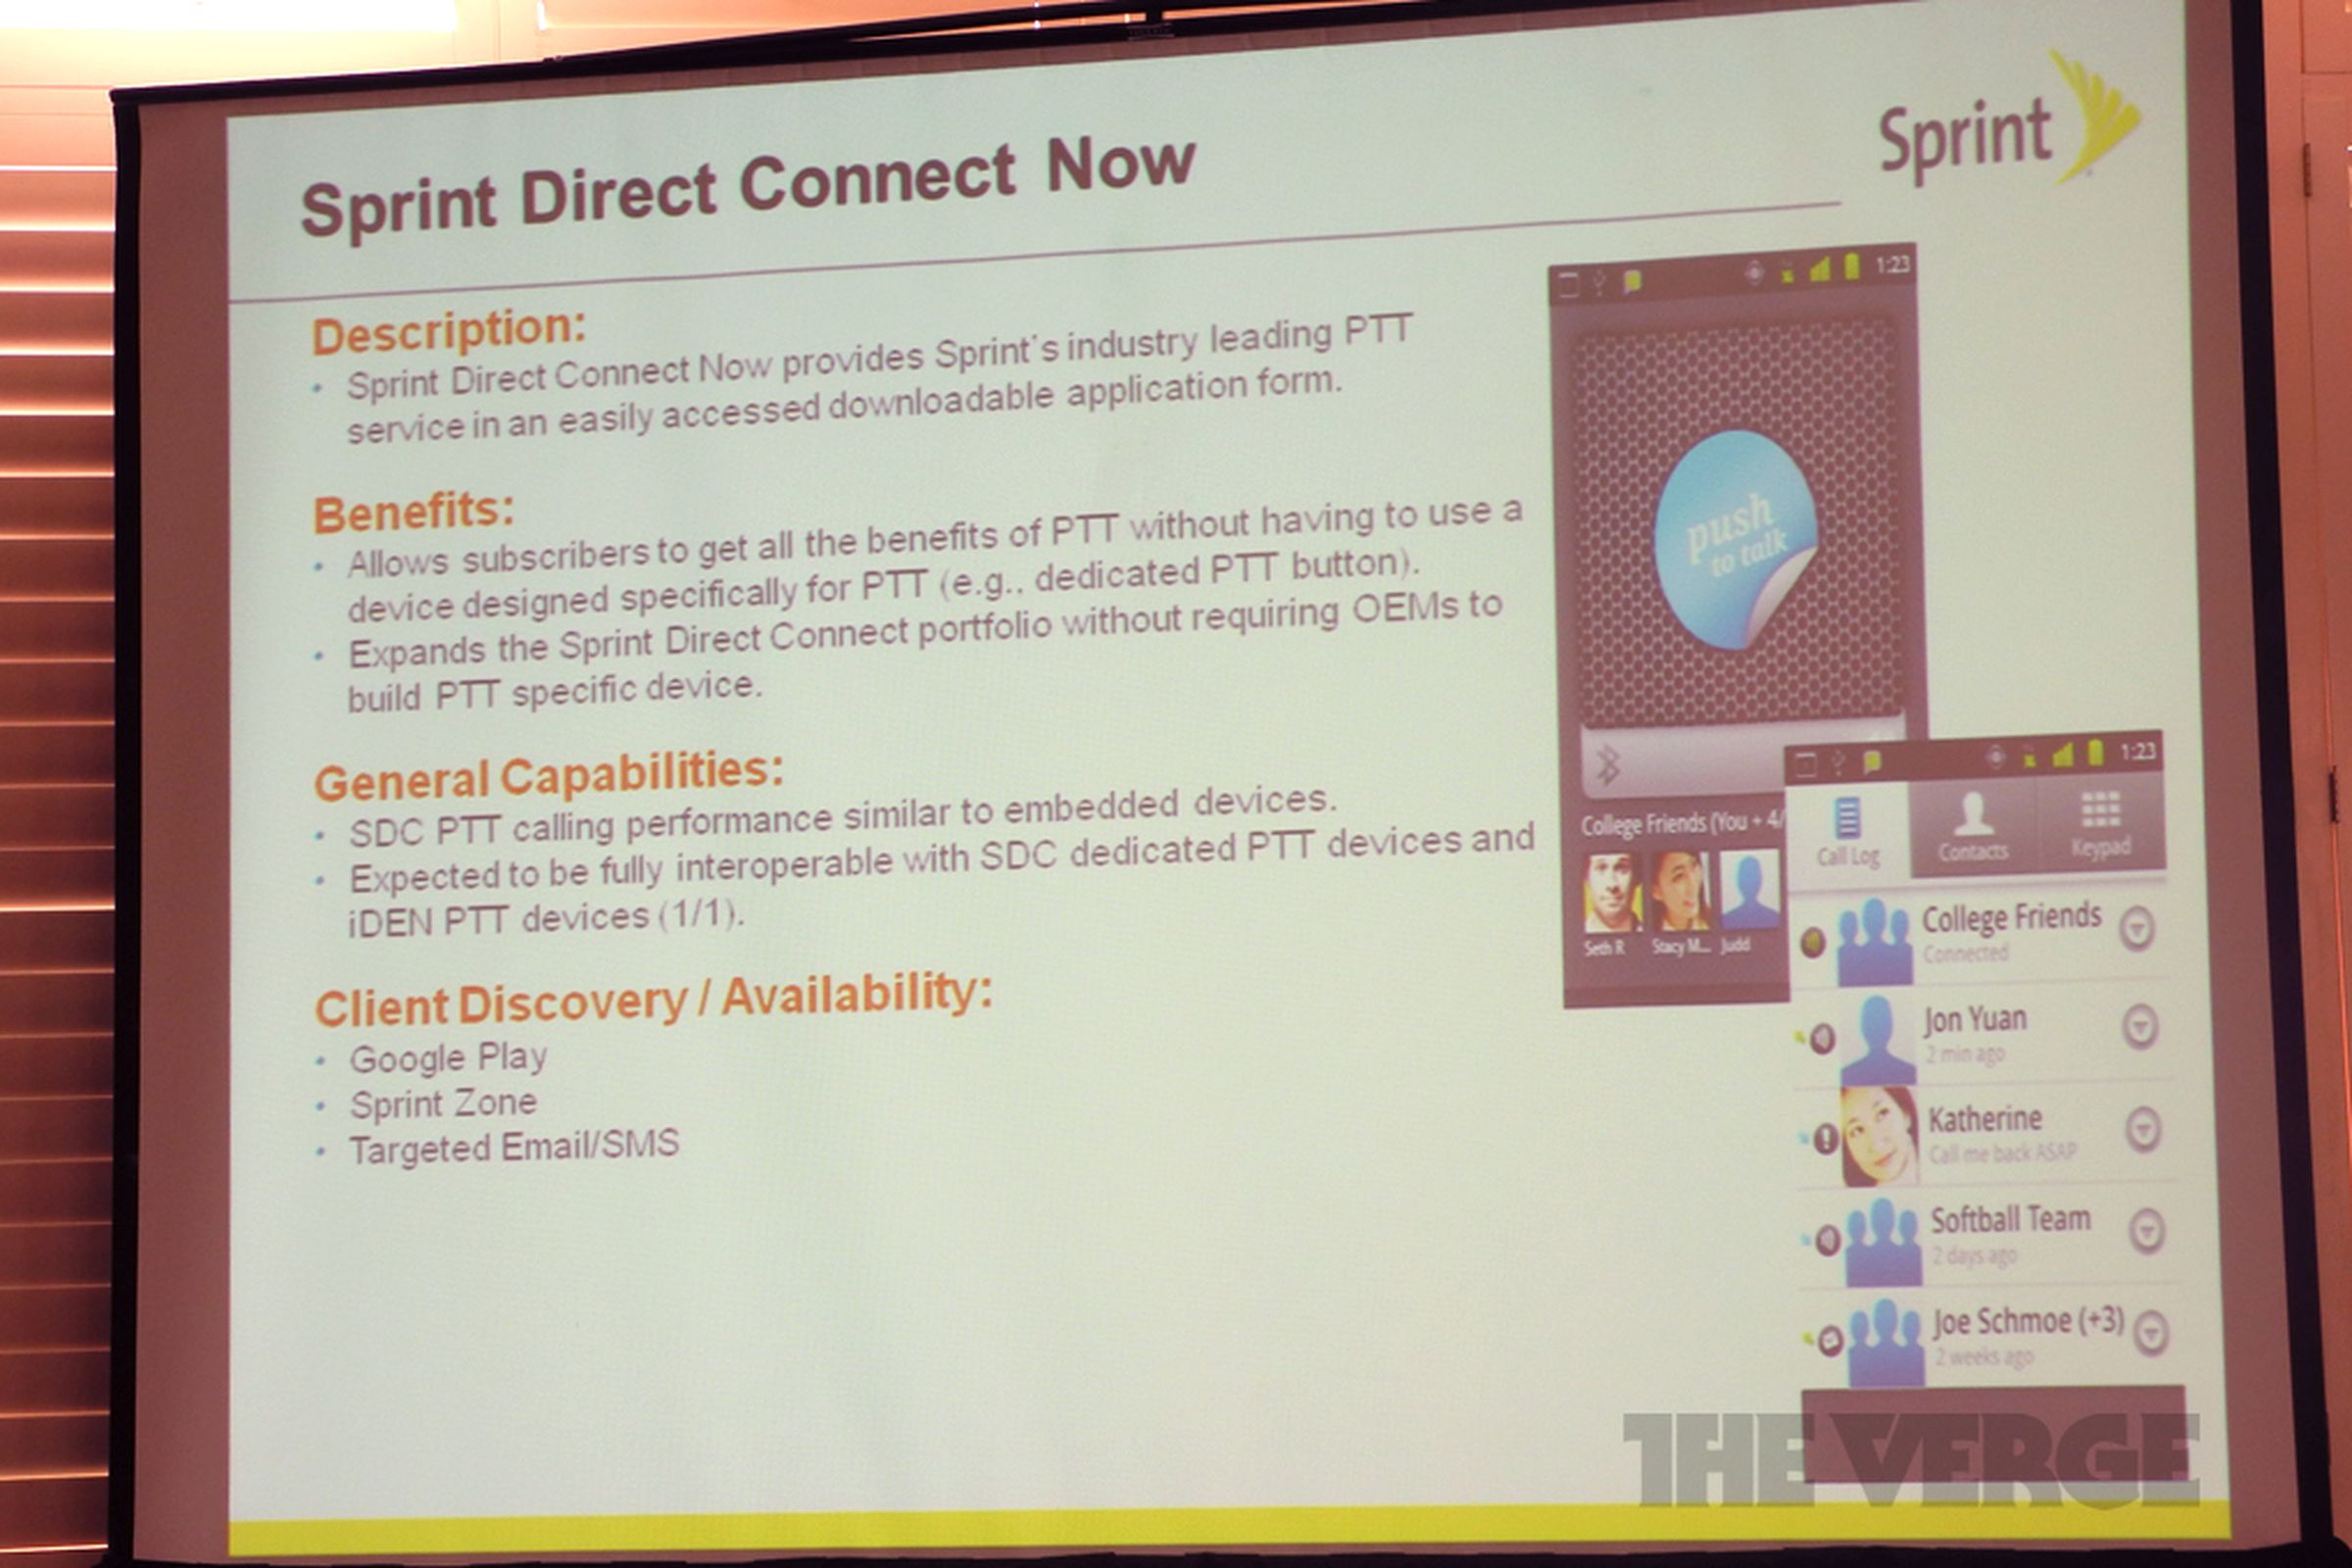 Sprint Direct Connect Now